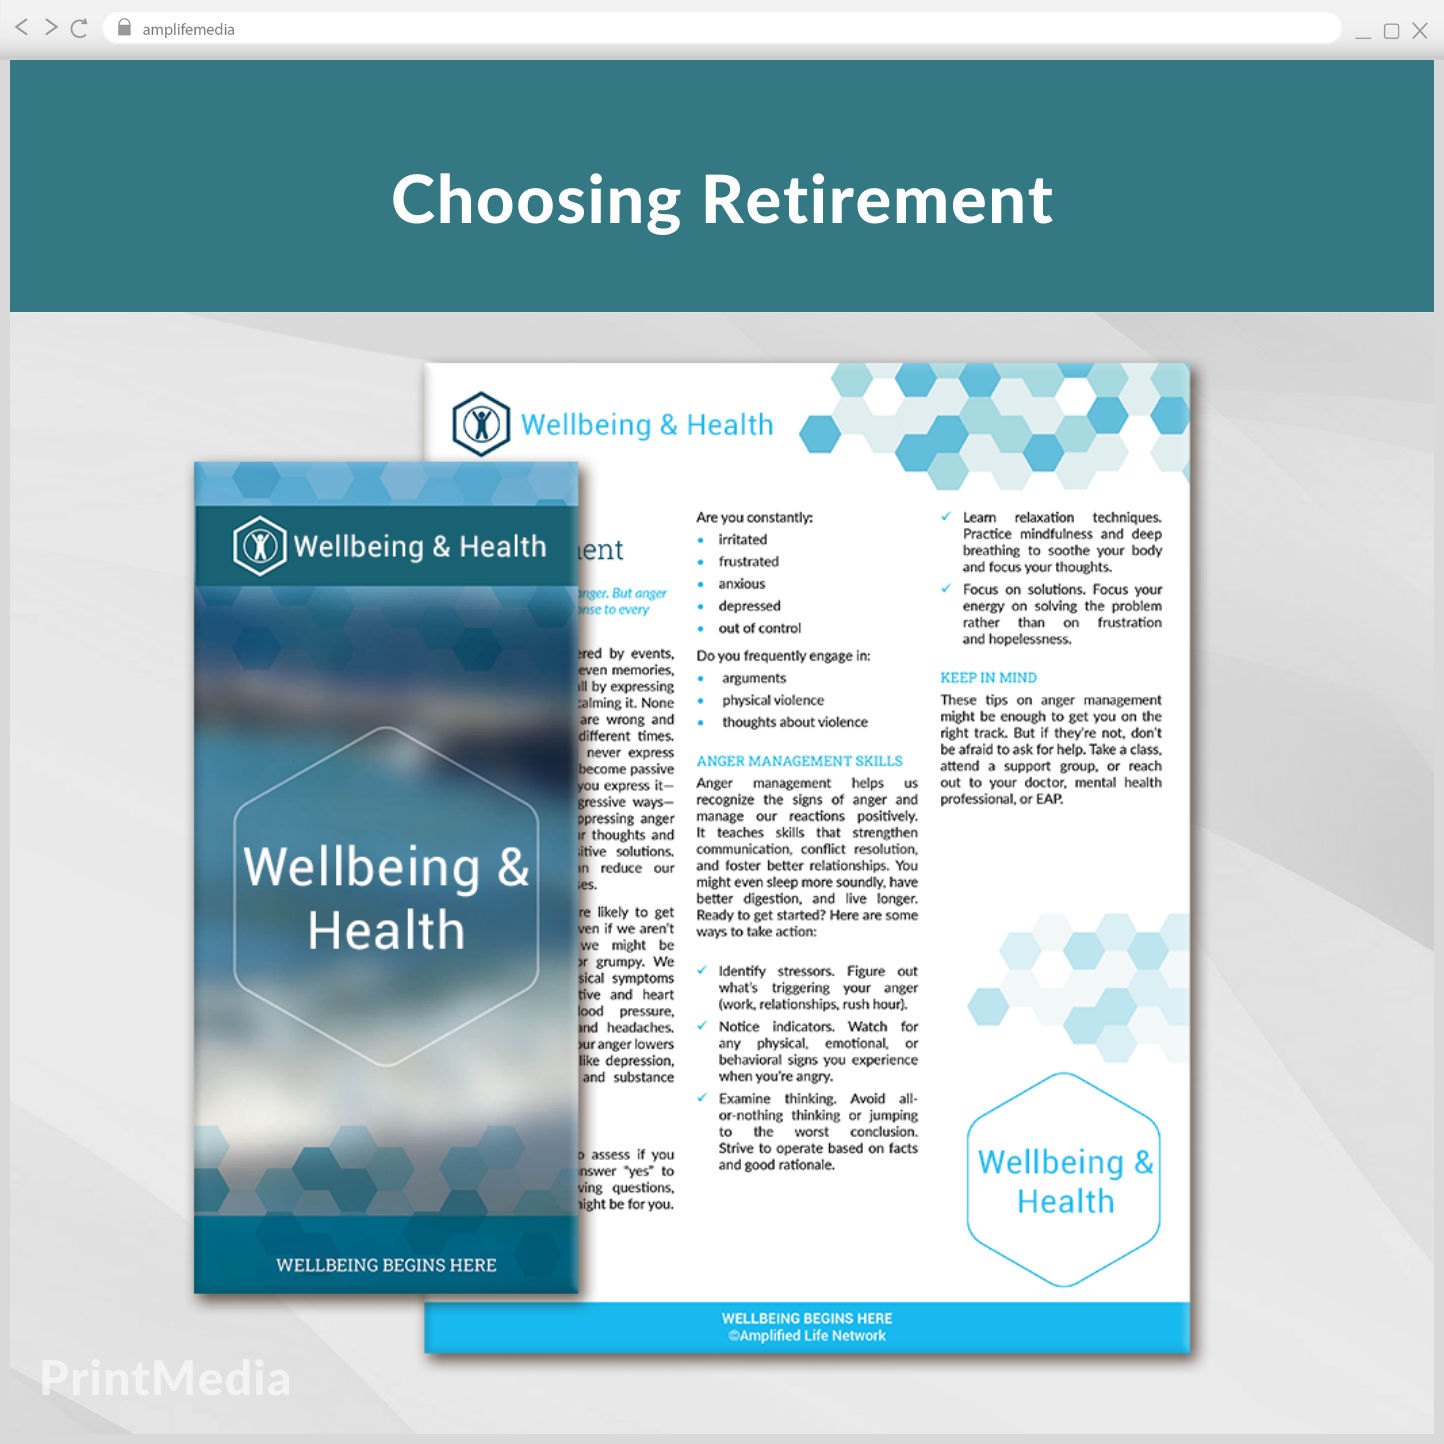 Subscription to Wellbeing Media: Choosing How to Spend Retirement PrintMedia 821